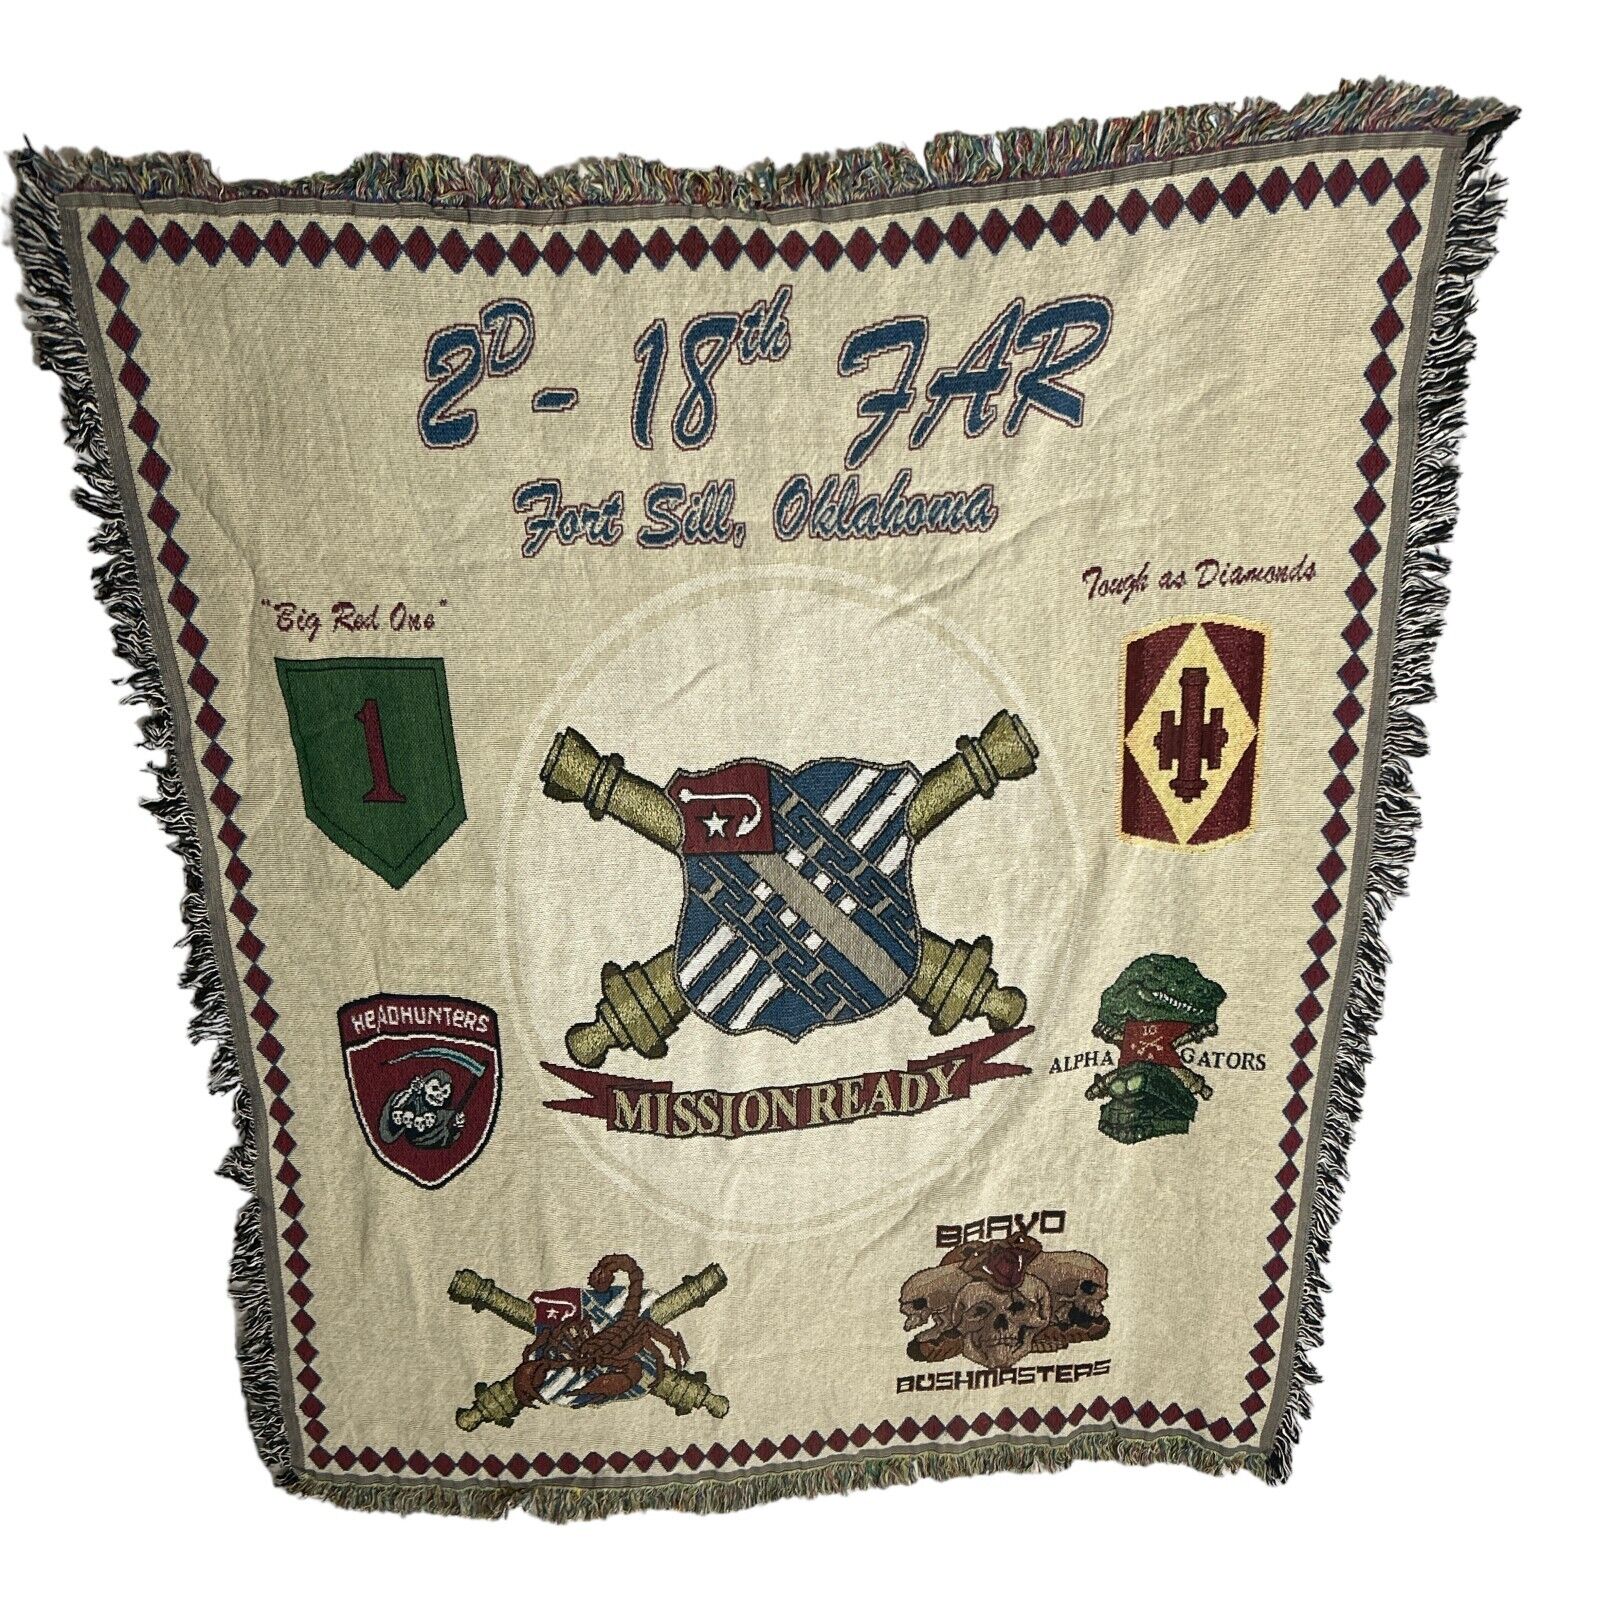 Fort Sill Oklahoma Throw Blanket US Army Military 60”x50” 2D-18th Far Tapestry